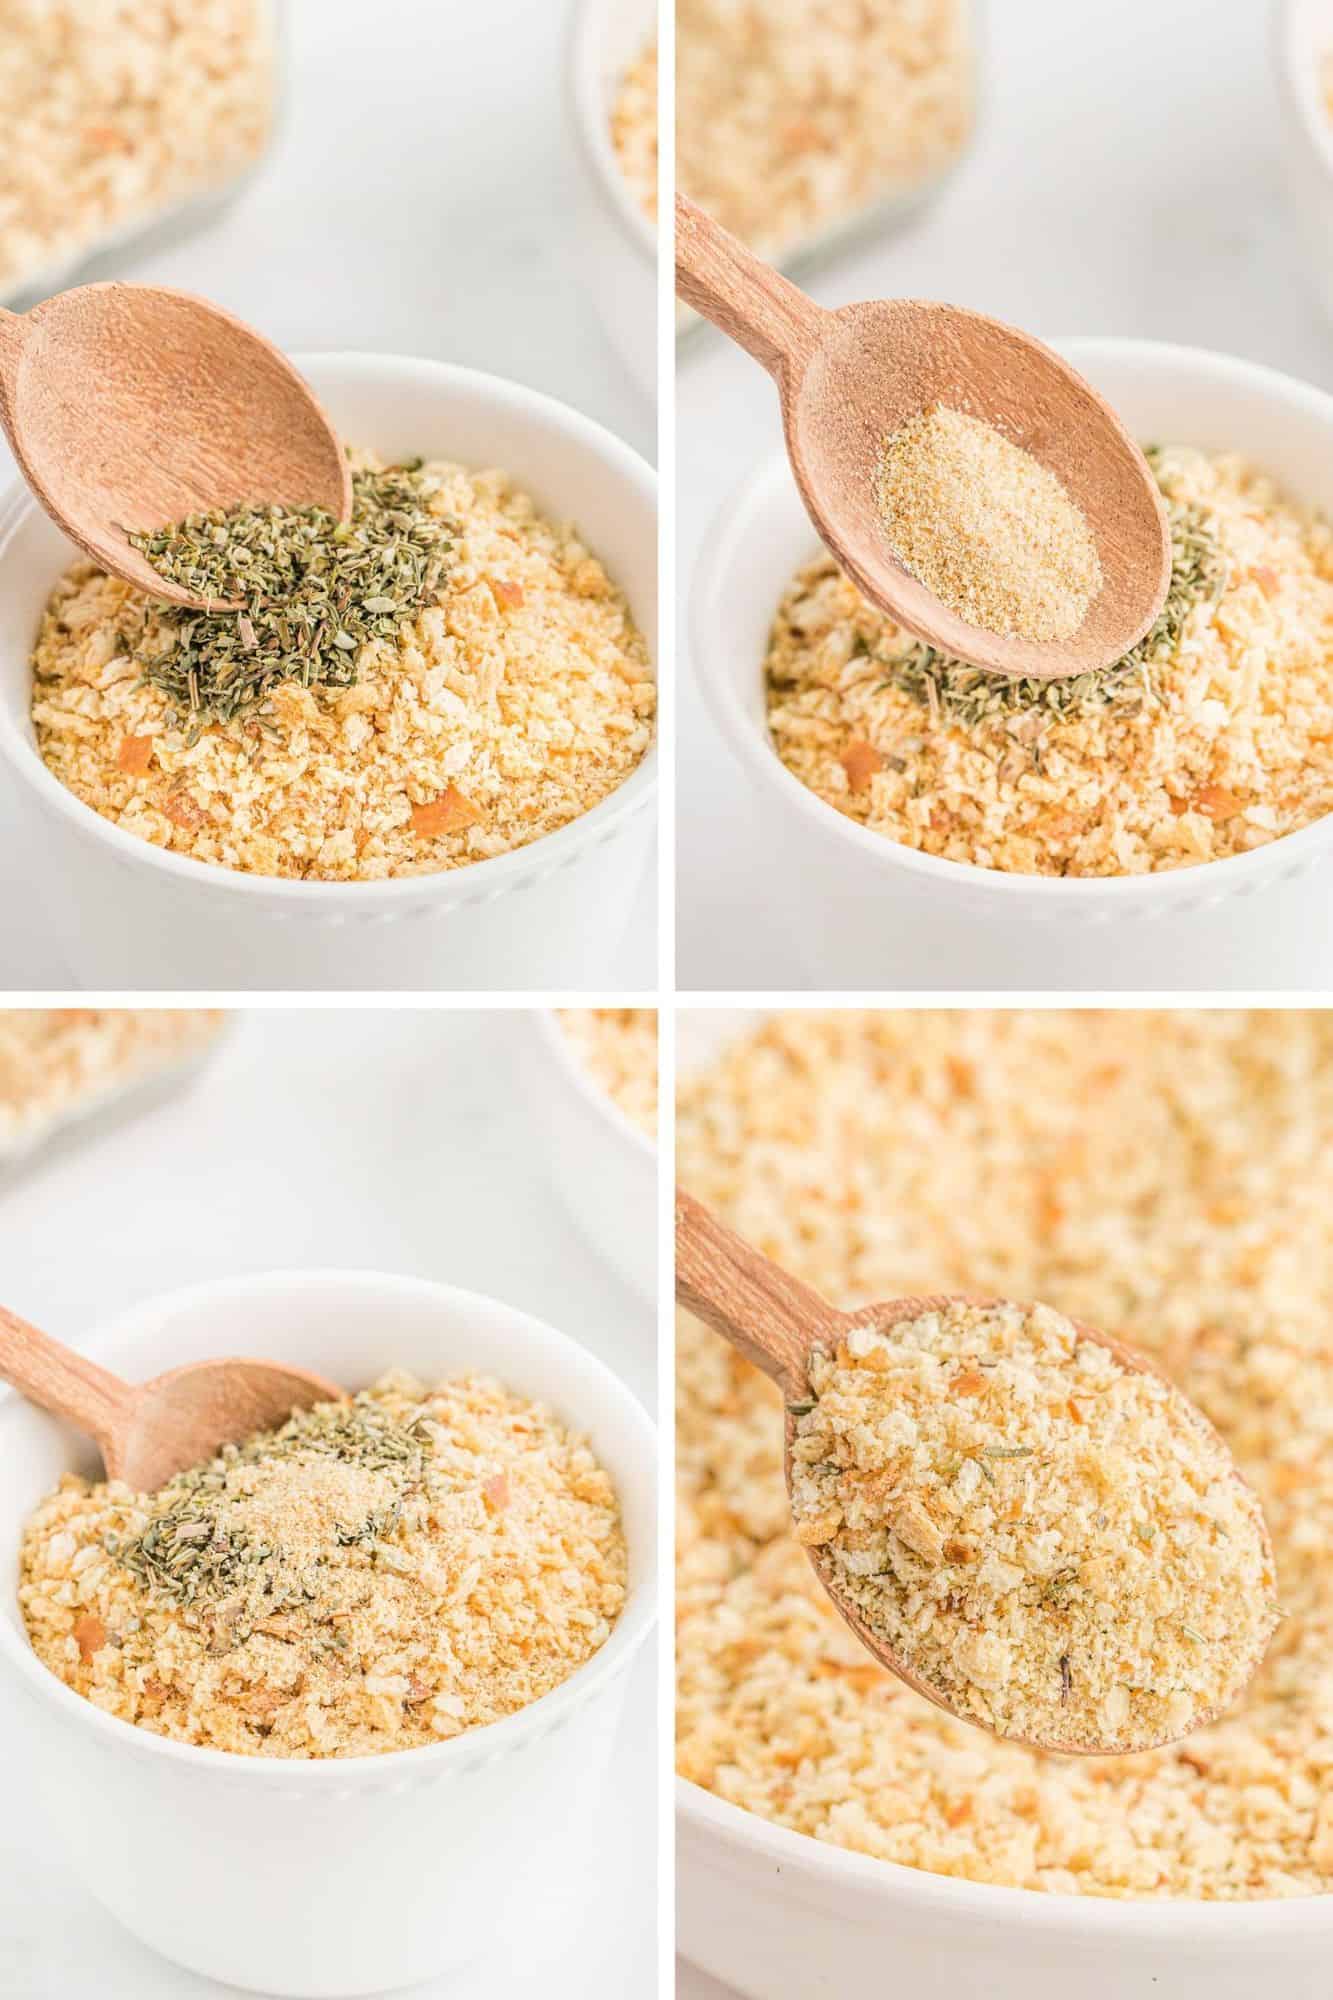 Four images showing how to make Italian bread crumbs.